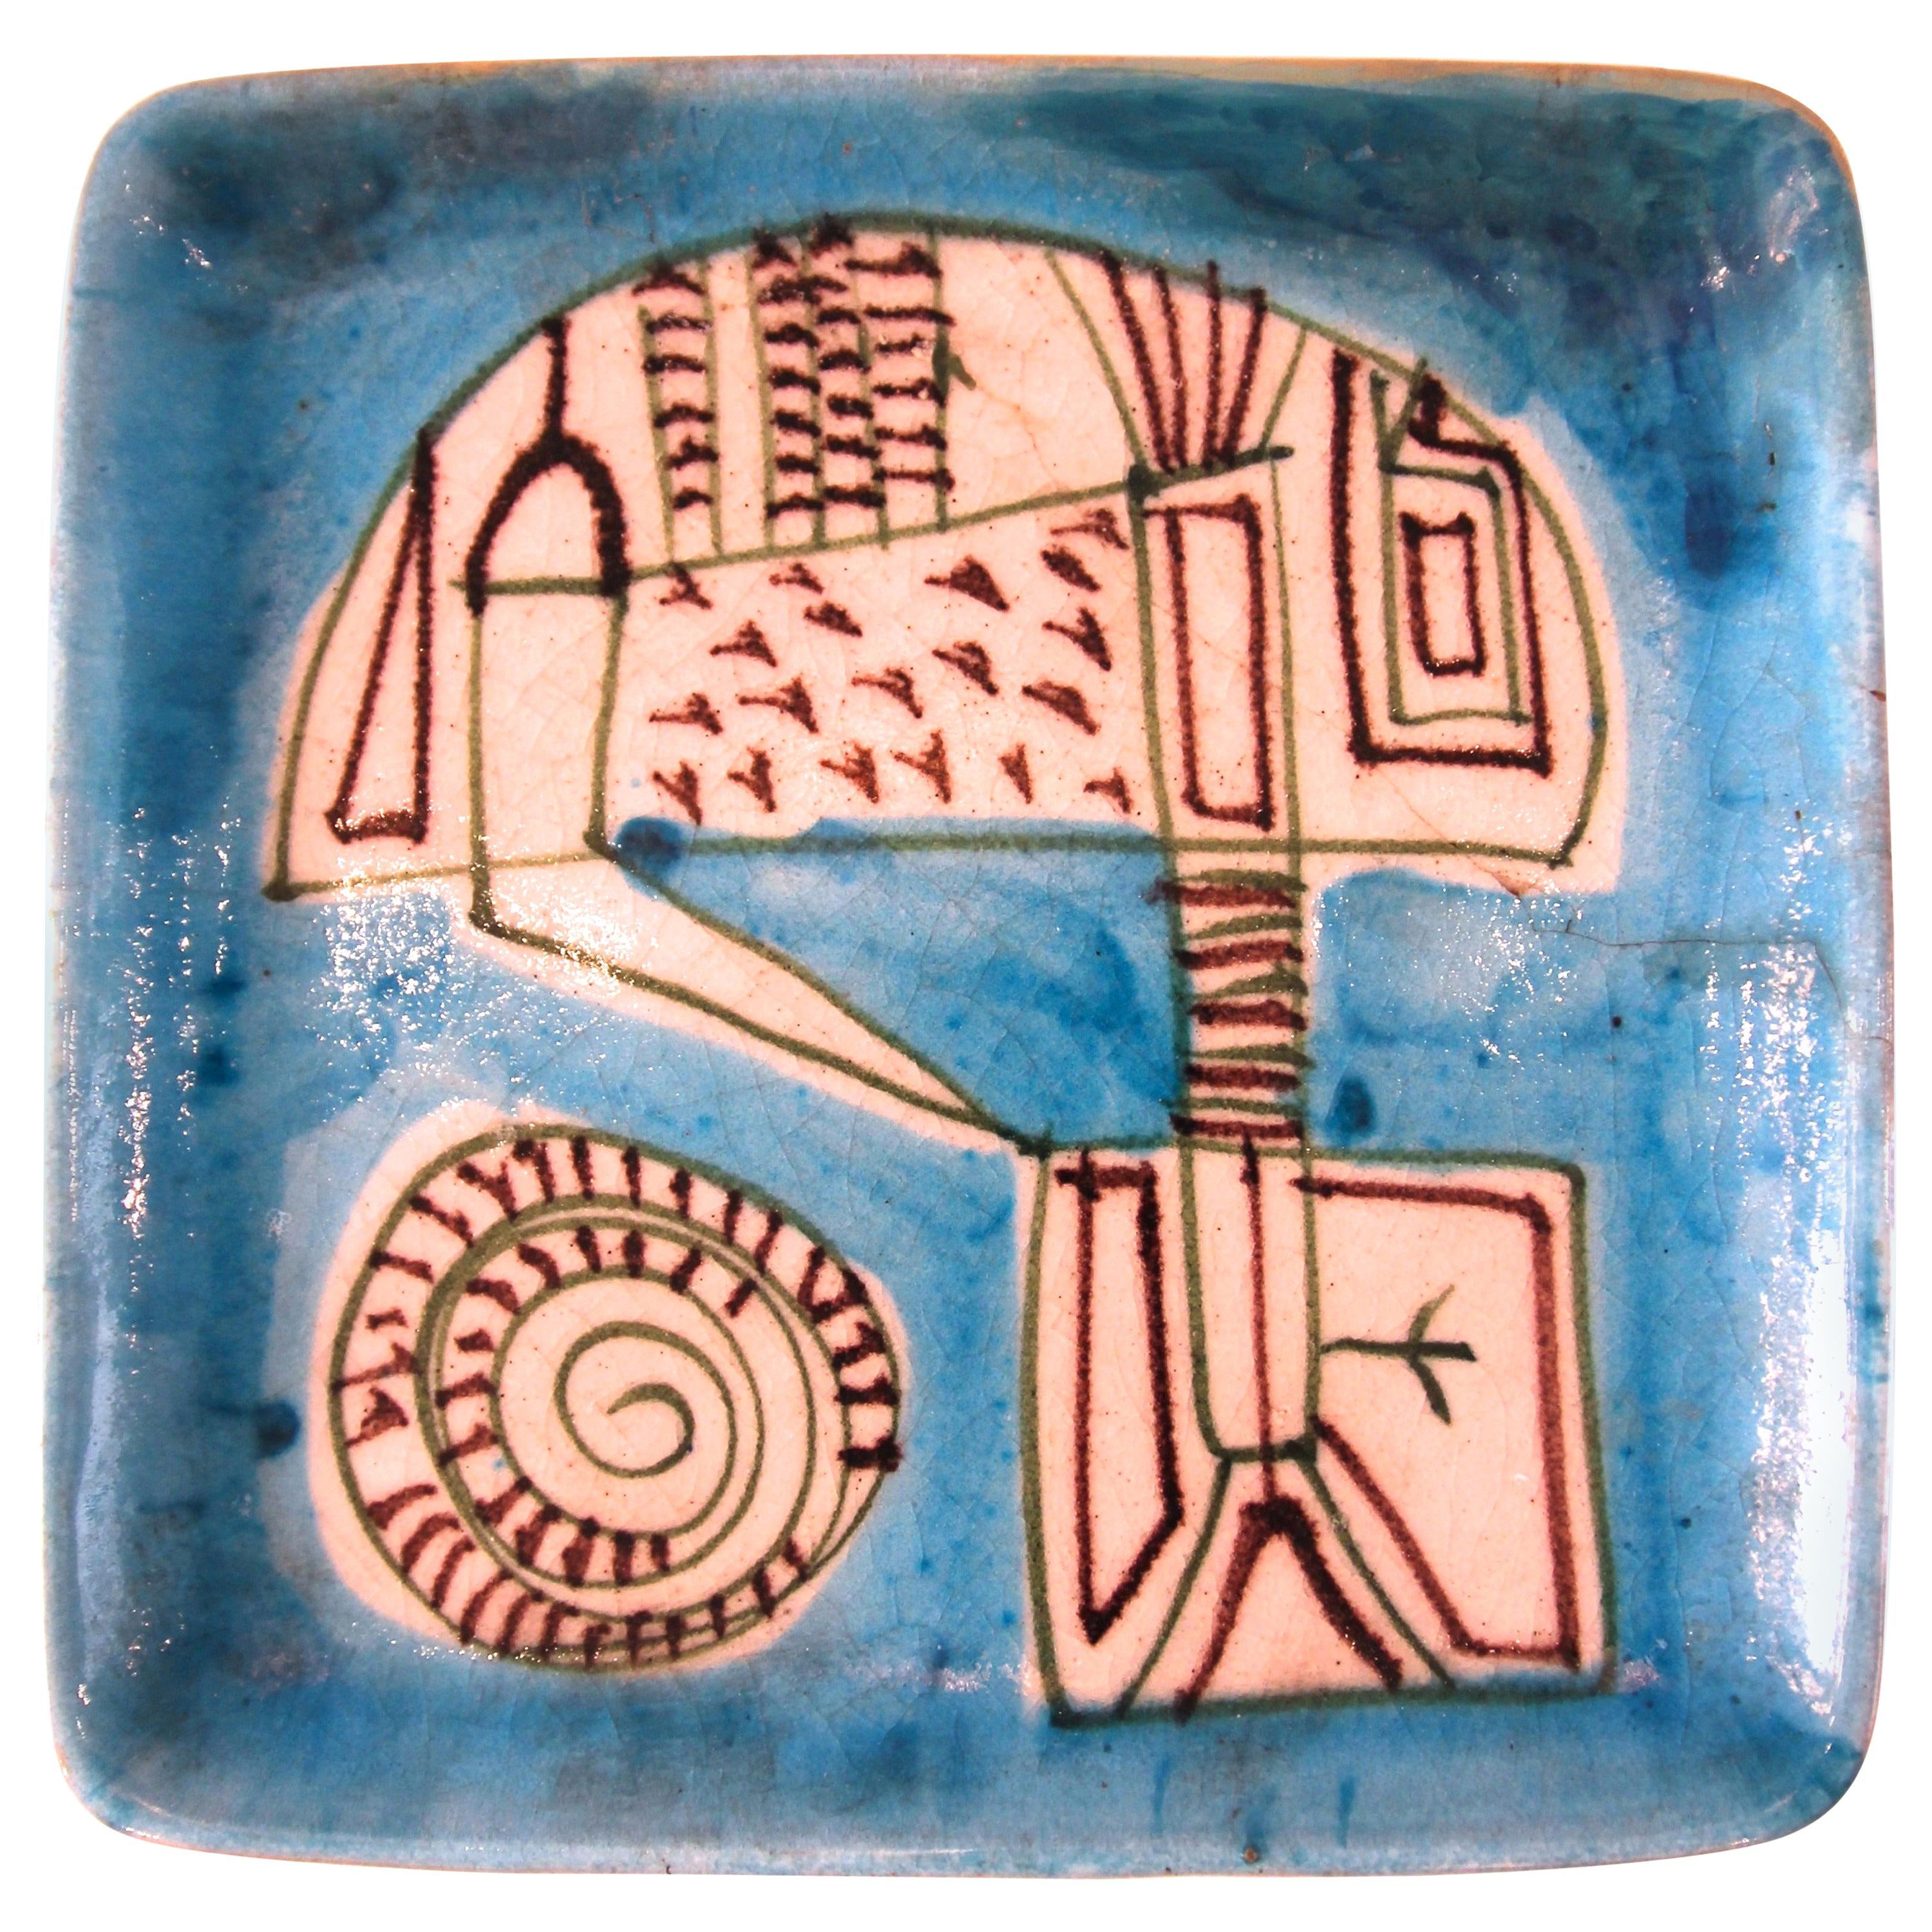 Guido Gambone, Polychrome Earthenware Plate, Signed, circa 1960, Italy